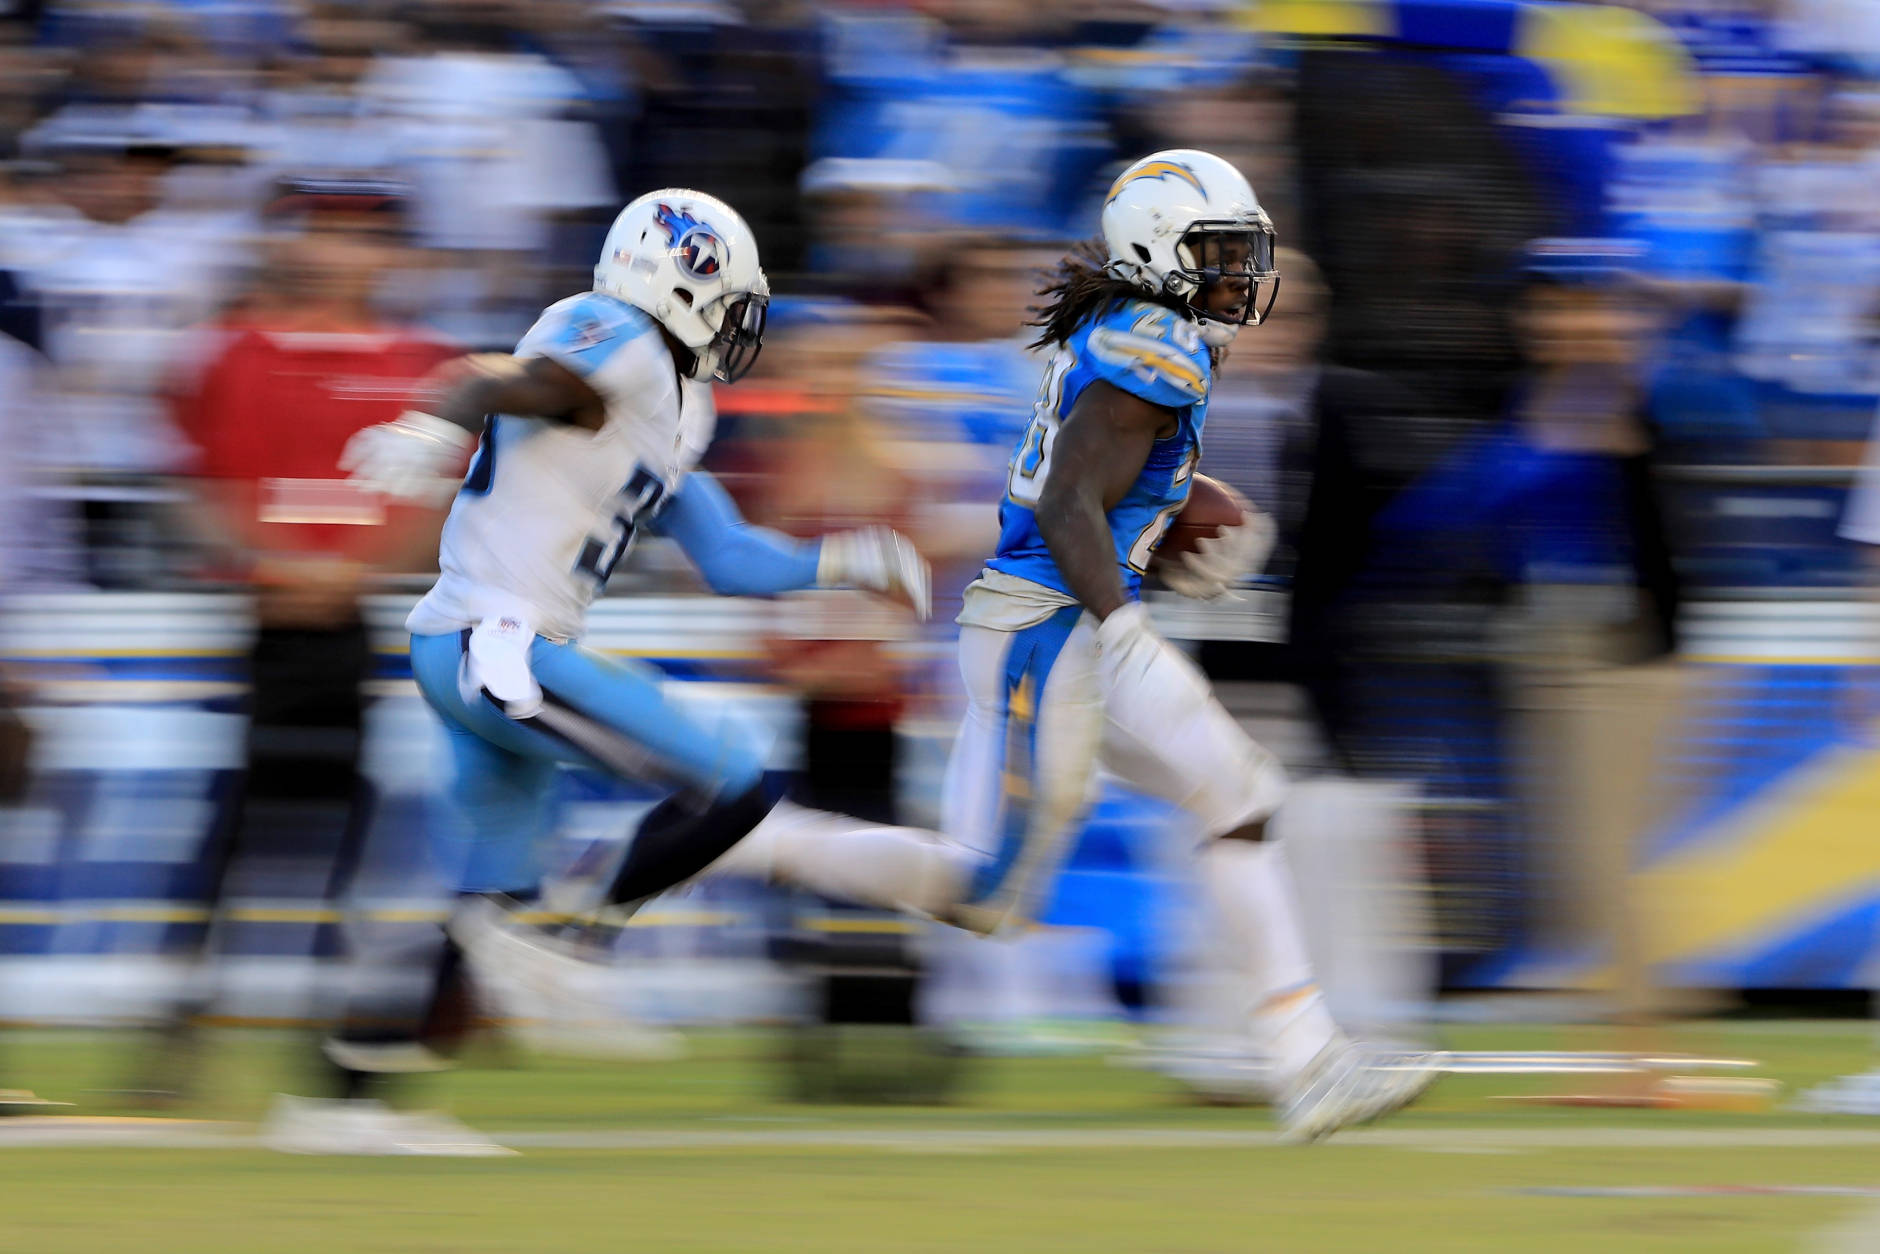 SAN DIEGO, CA - NOVEMBER 06:   Melvin Gordon #28 of the San Diego Chargers eludes  Jason McCourty #30 of the Tennessee Titans on a 35 yard pass play during the second half of a game at Qualcomm Stadium on November 6, 2016 in San Diego, California.  (Photo by Sean M. Haffey/Getty Images)